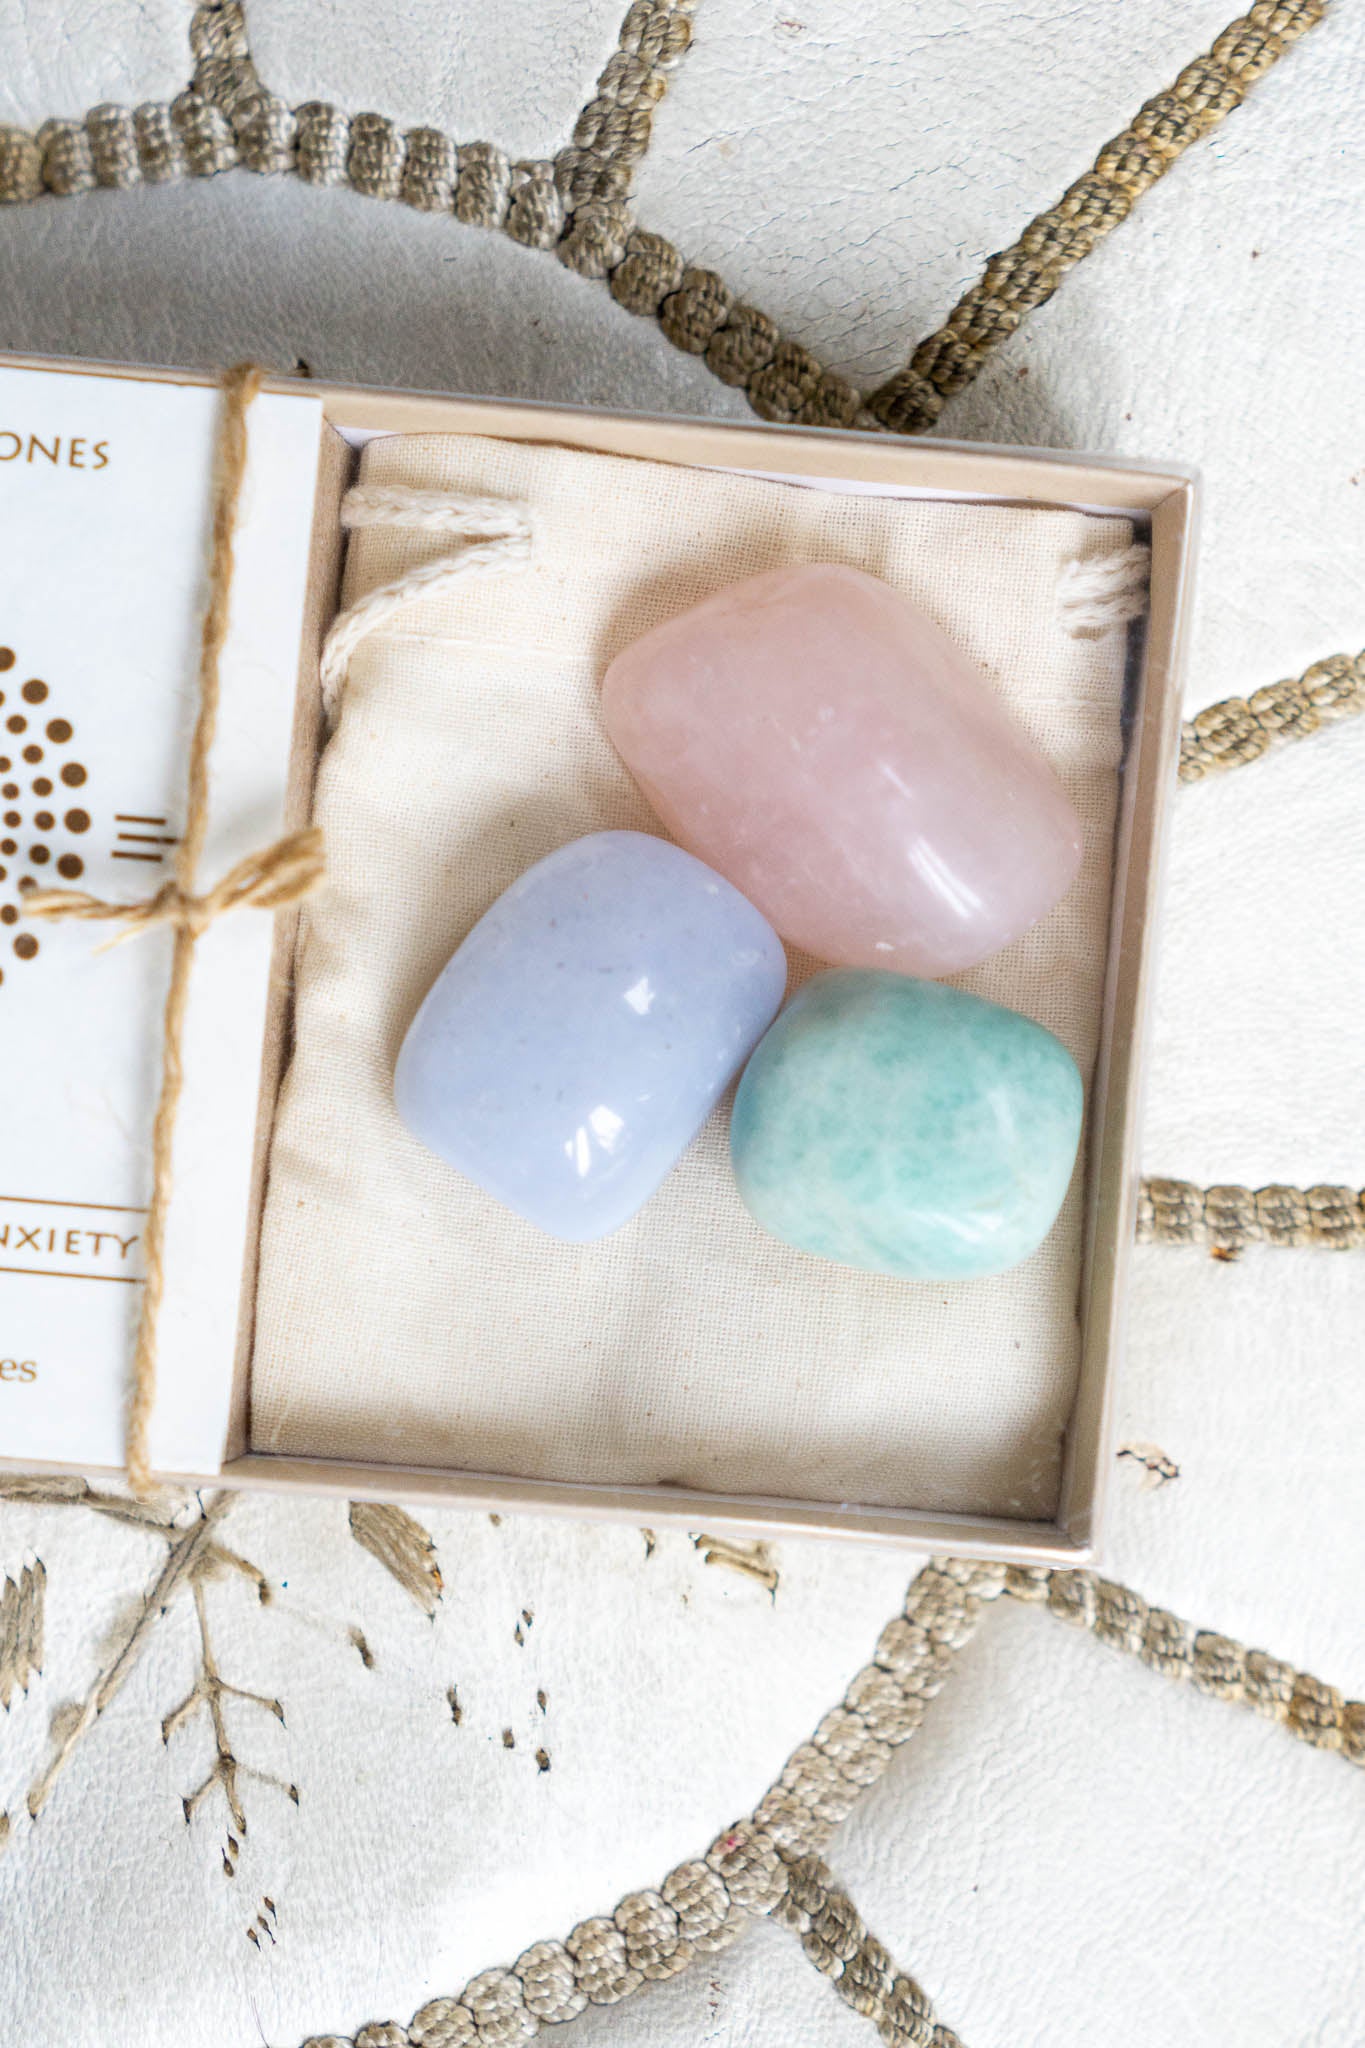 Calming and Anti-Anxiety Stone Set - The Canyon